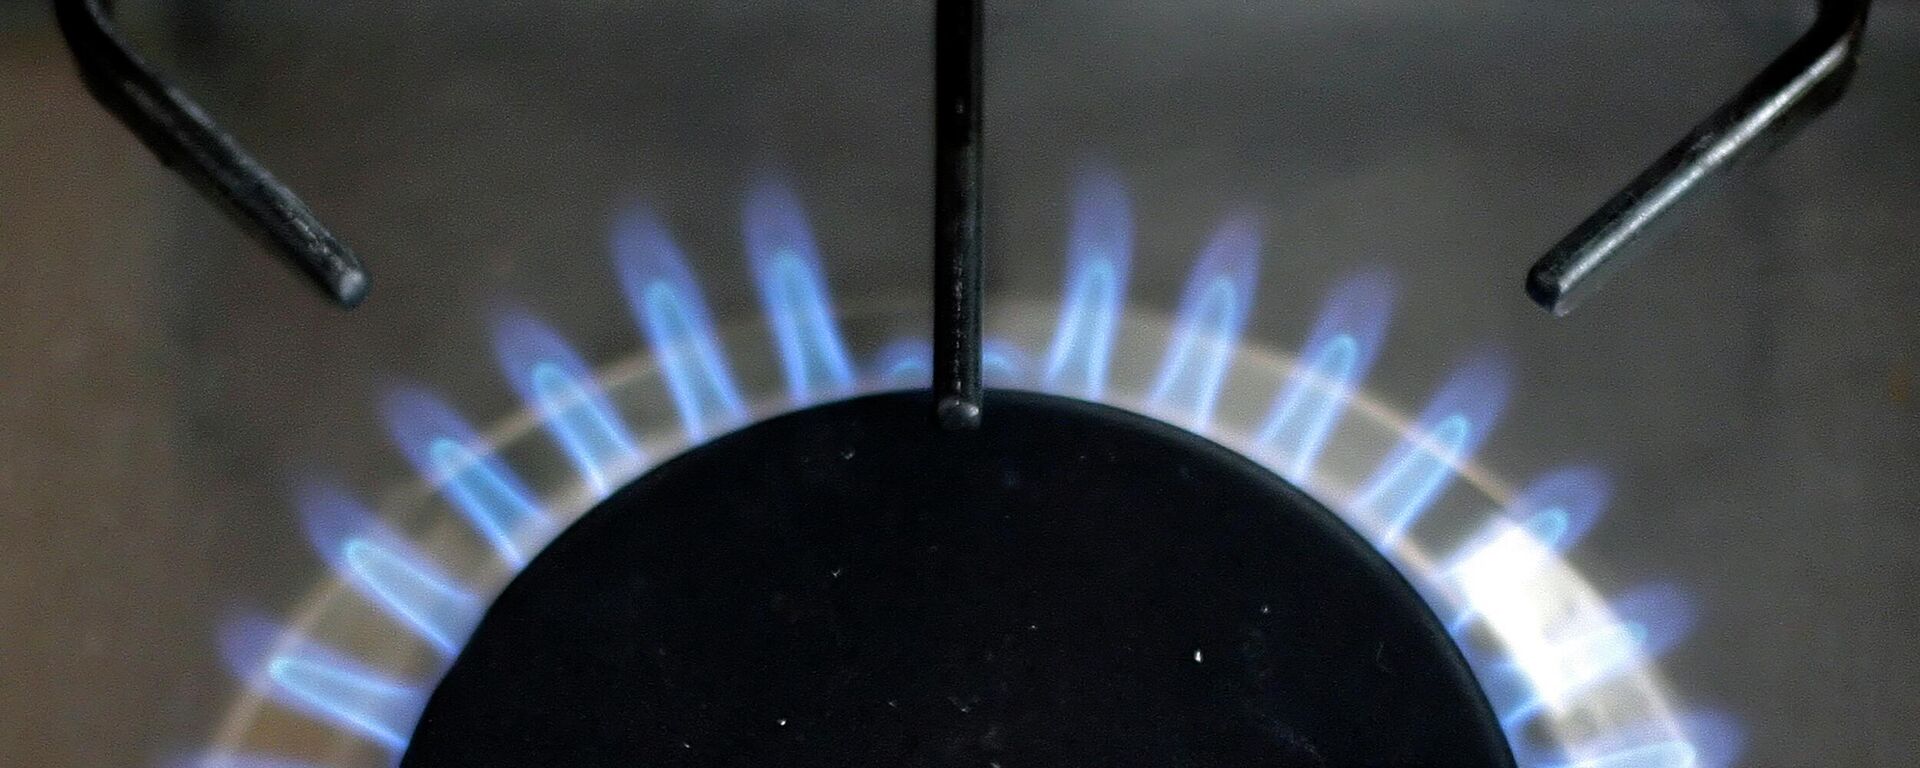 A gas burner of a stove is pictured in London, on July 31, 2008.  British energy firm Centrica said Thursday that net profit surged 79 percent to 1.802 billion pounds (2.286 billion euros, 3.569 billion dollars) in the first half as it charged more for its gas and electricity to fight soaring wholesale costs. - Sputnik International, 1920, 02.08.2022